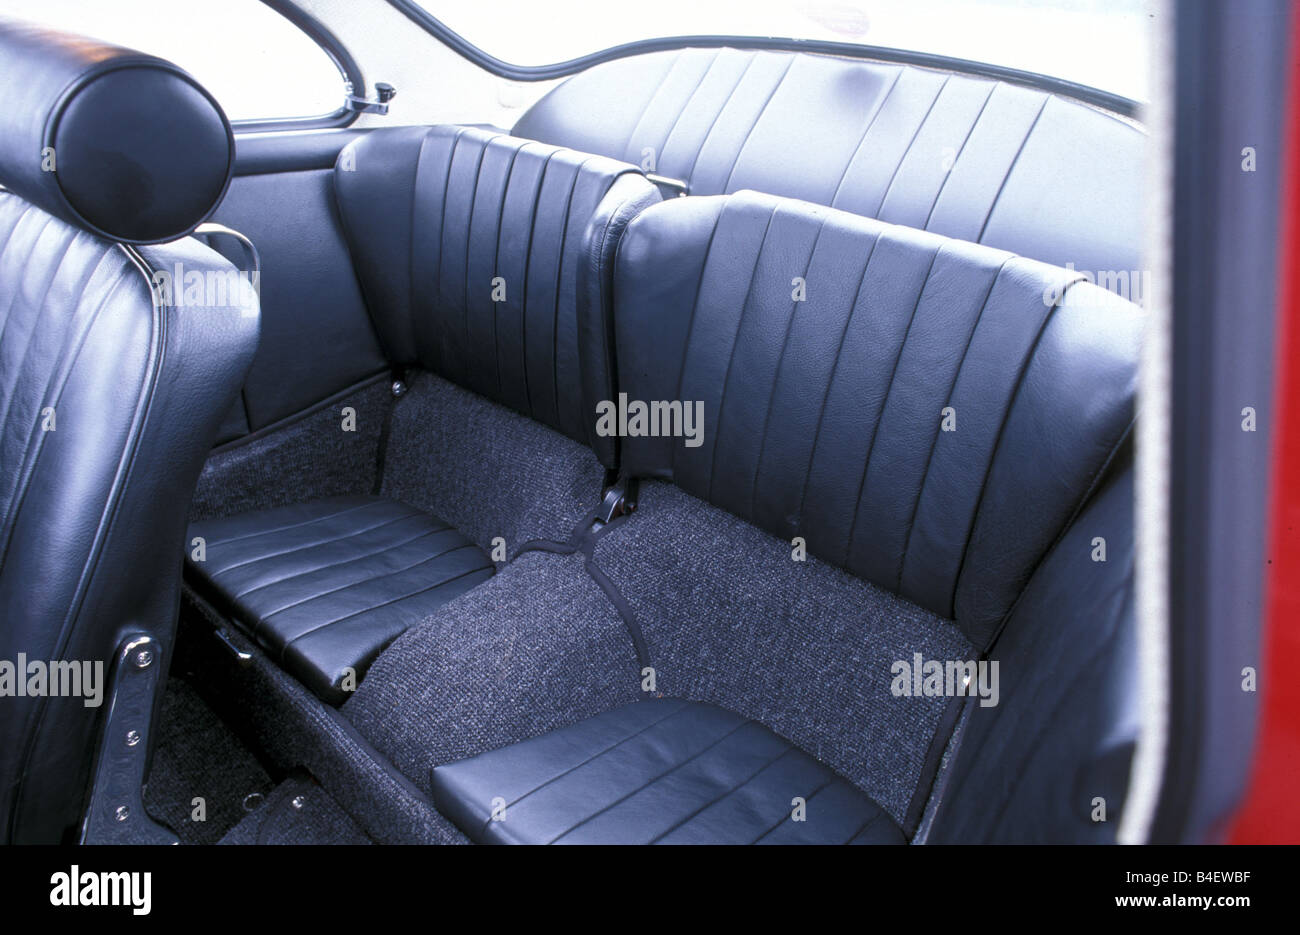 Car, Porsche 356 Carrera 2, model year 1963, red, sports car, Coupé, Coupe, red, vintage car, 1960s, sixties, interior, seats, b Stock Photo